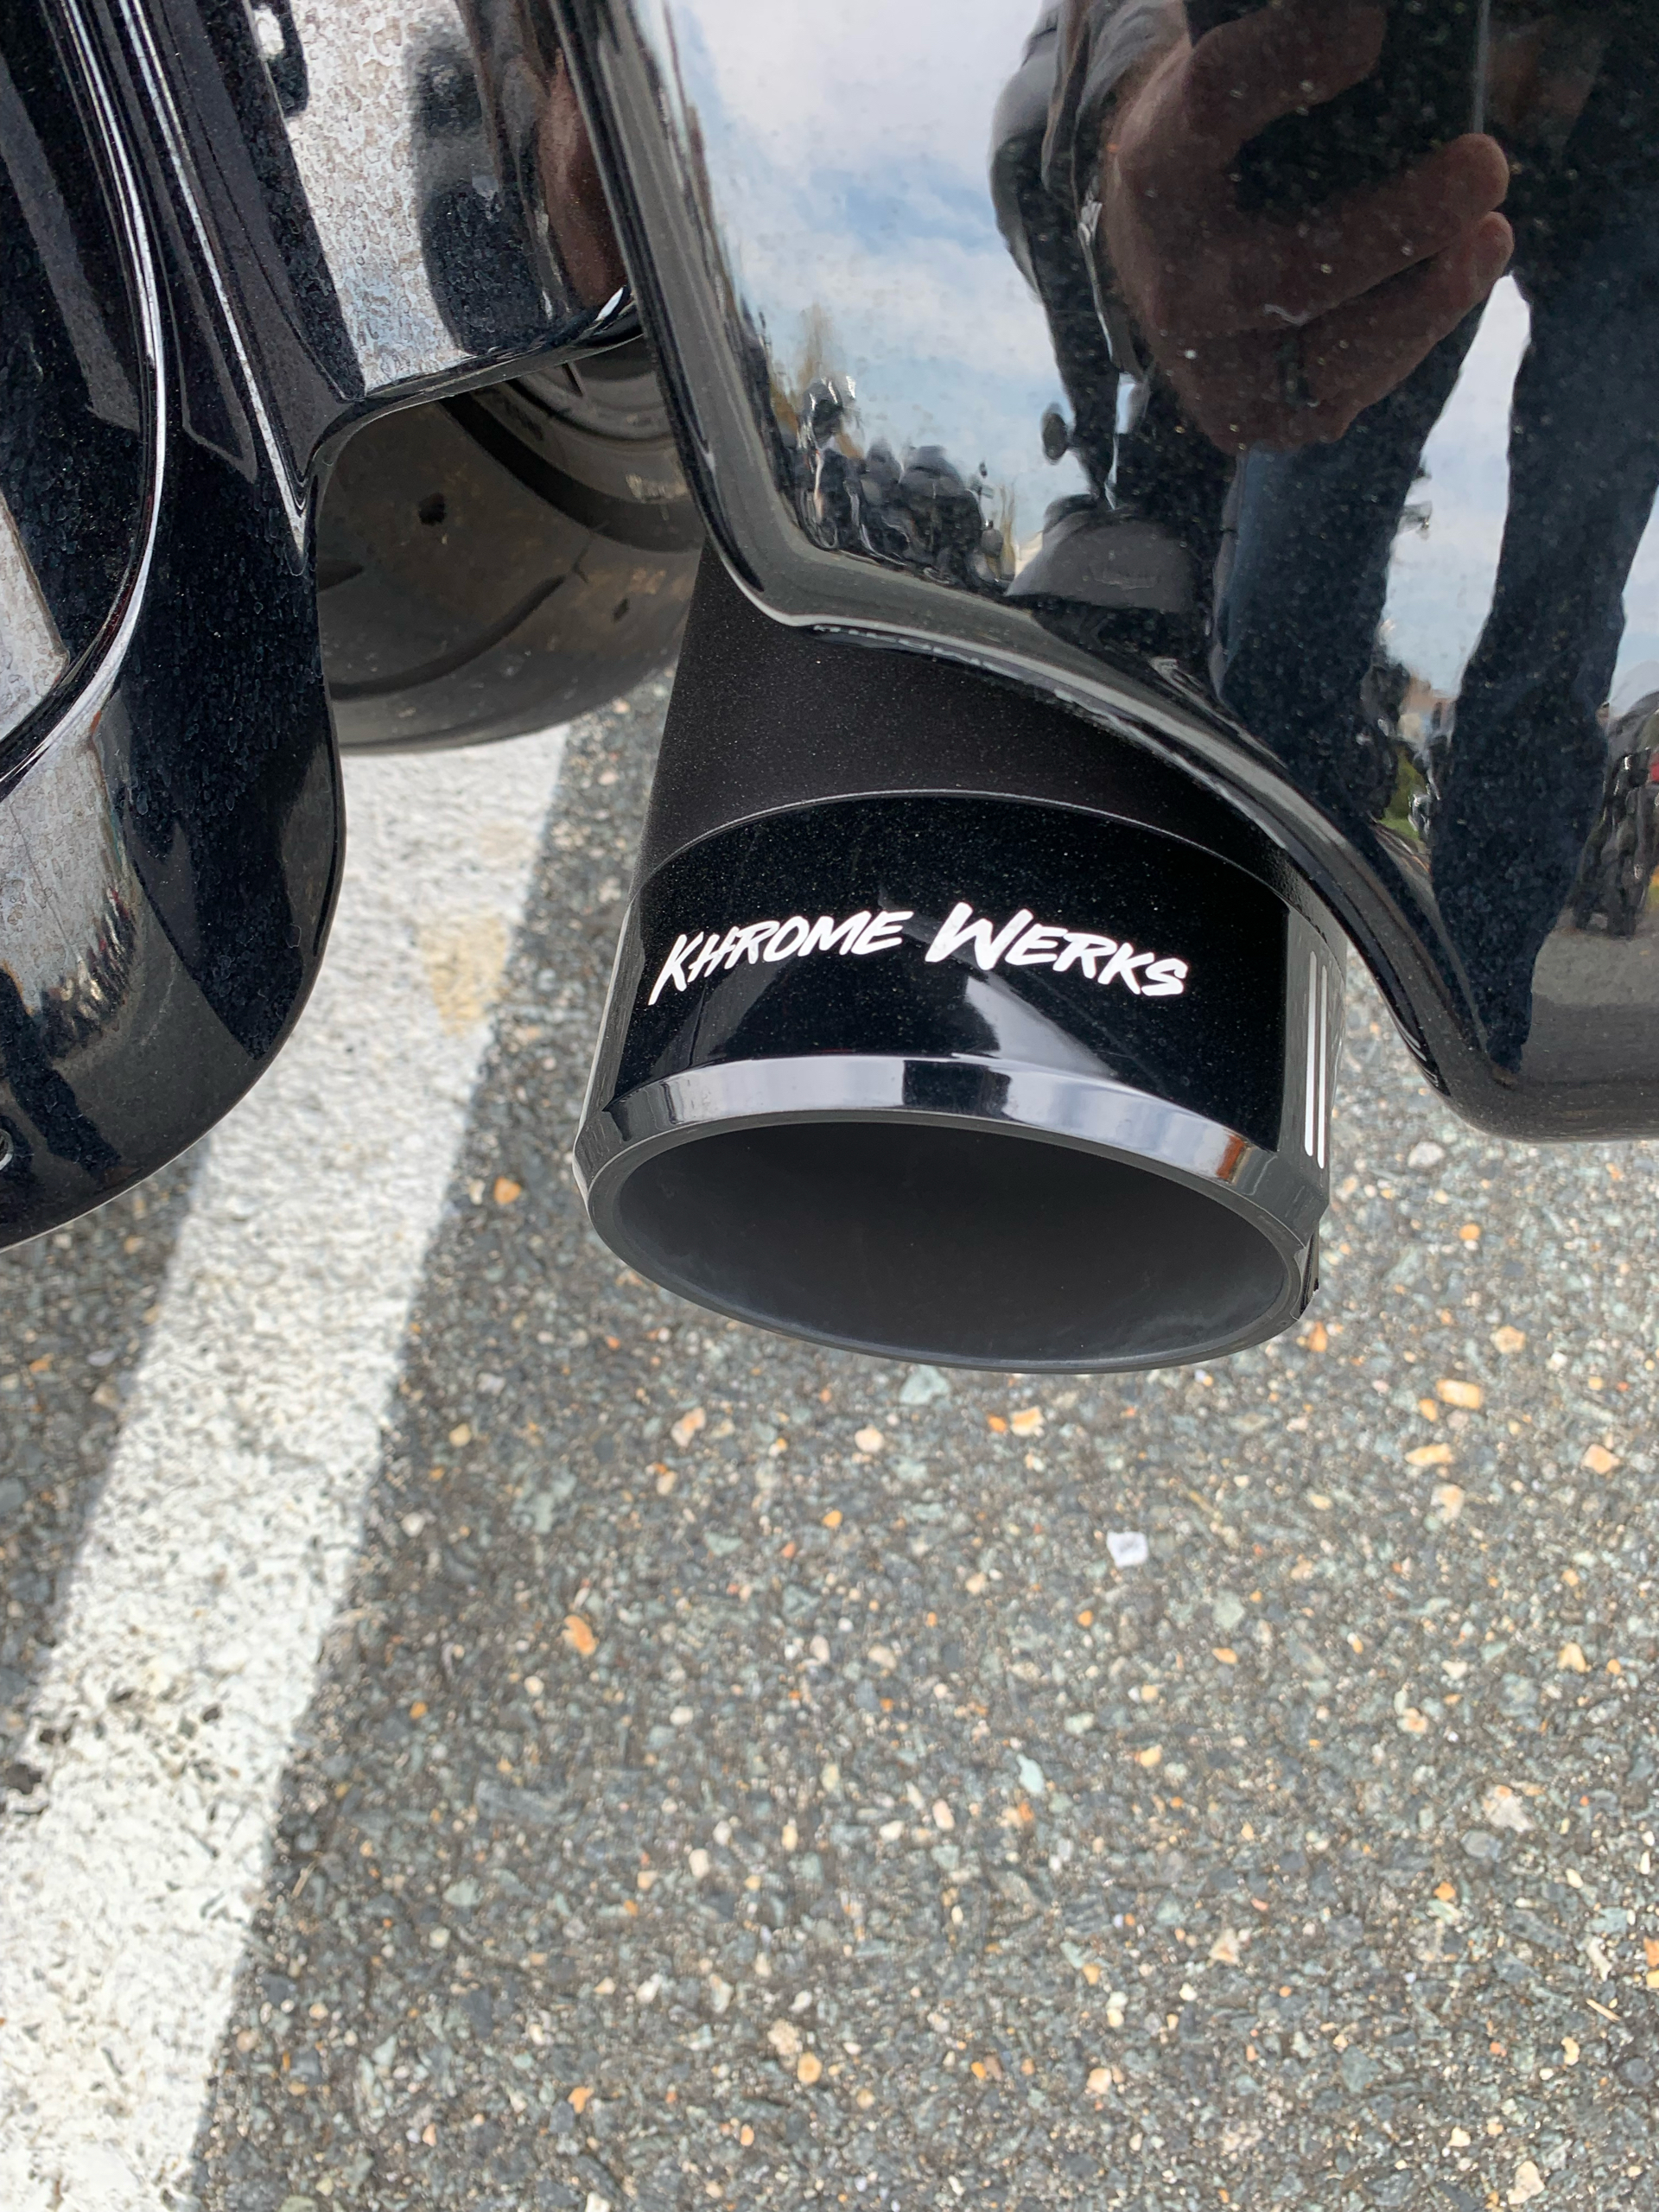 2020 Harley-Davidson ROAD GLIDE SPECIAL in Dumfries, Virginia - Photo 6